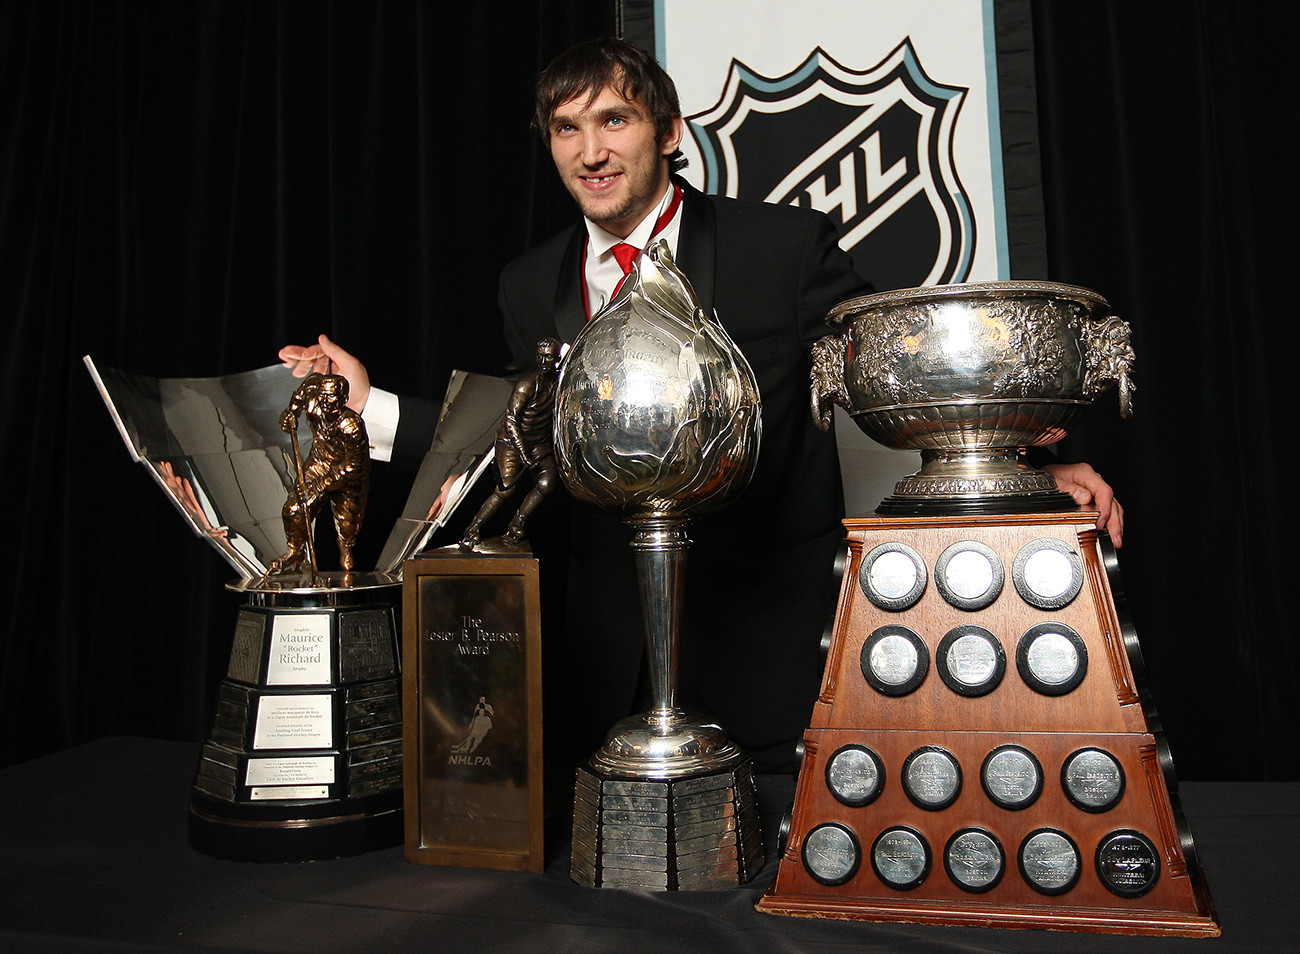 Alex Ovechkin of the Washington Capitals wins the, from left to right, Maurice 'Rocket' Richard Trophy, Lester B. Pearson Award, Hart Memorial Trophy at the 2008 NHL awards at the Elgin Theatre in Toronto.